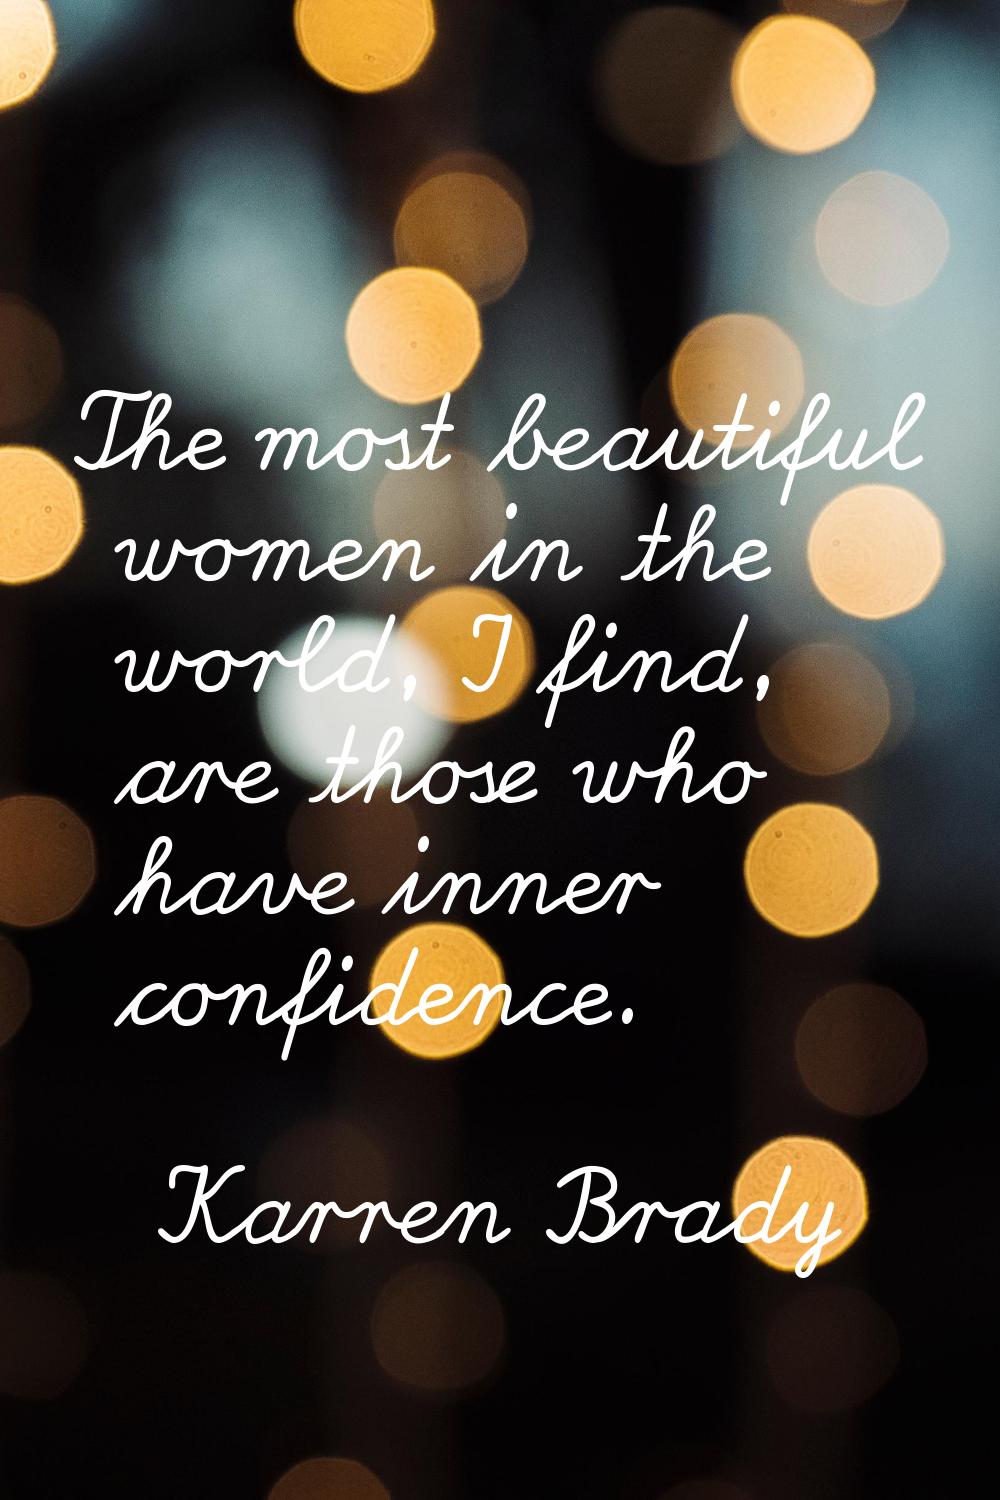 The most beautiful women in the world, I find, are those who have inner confidence.